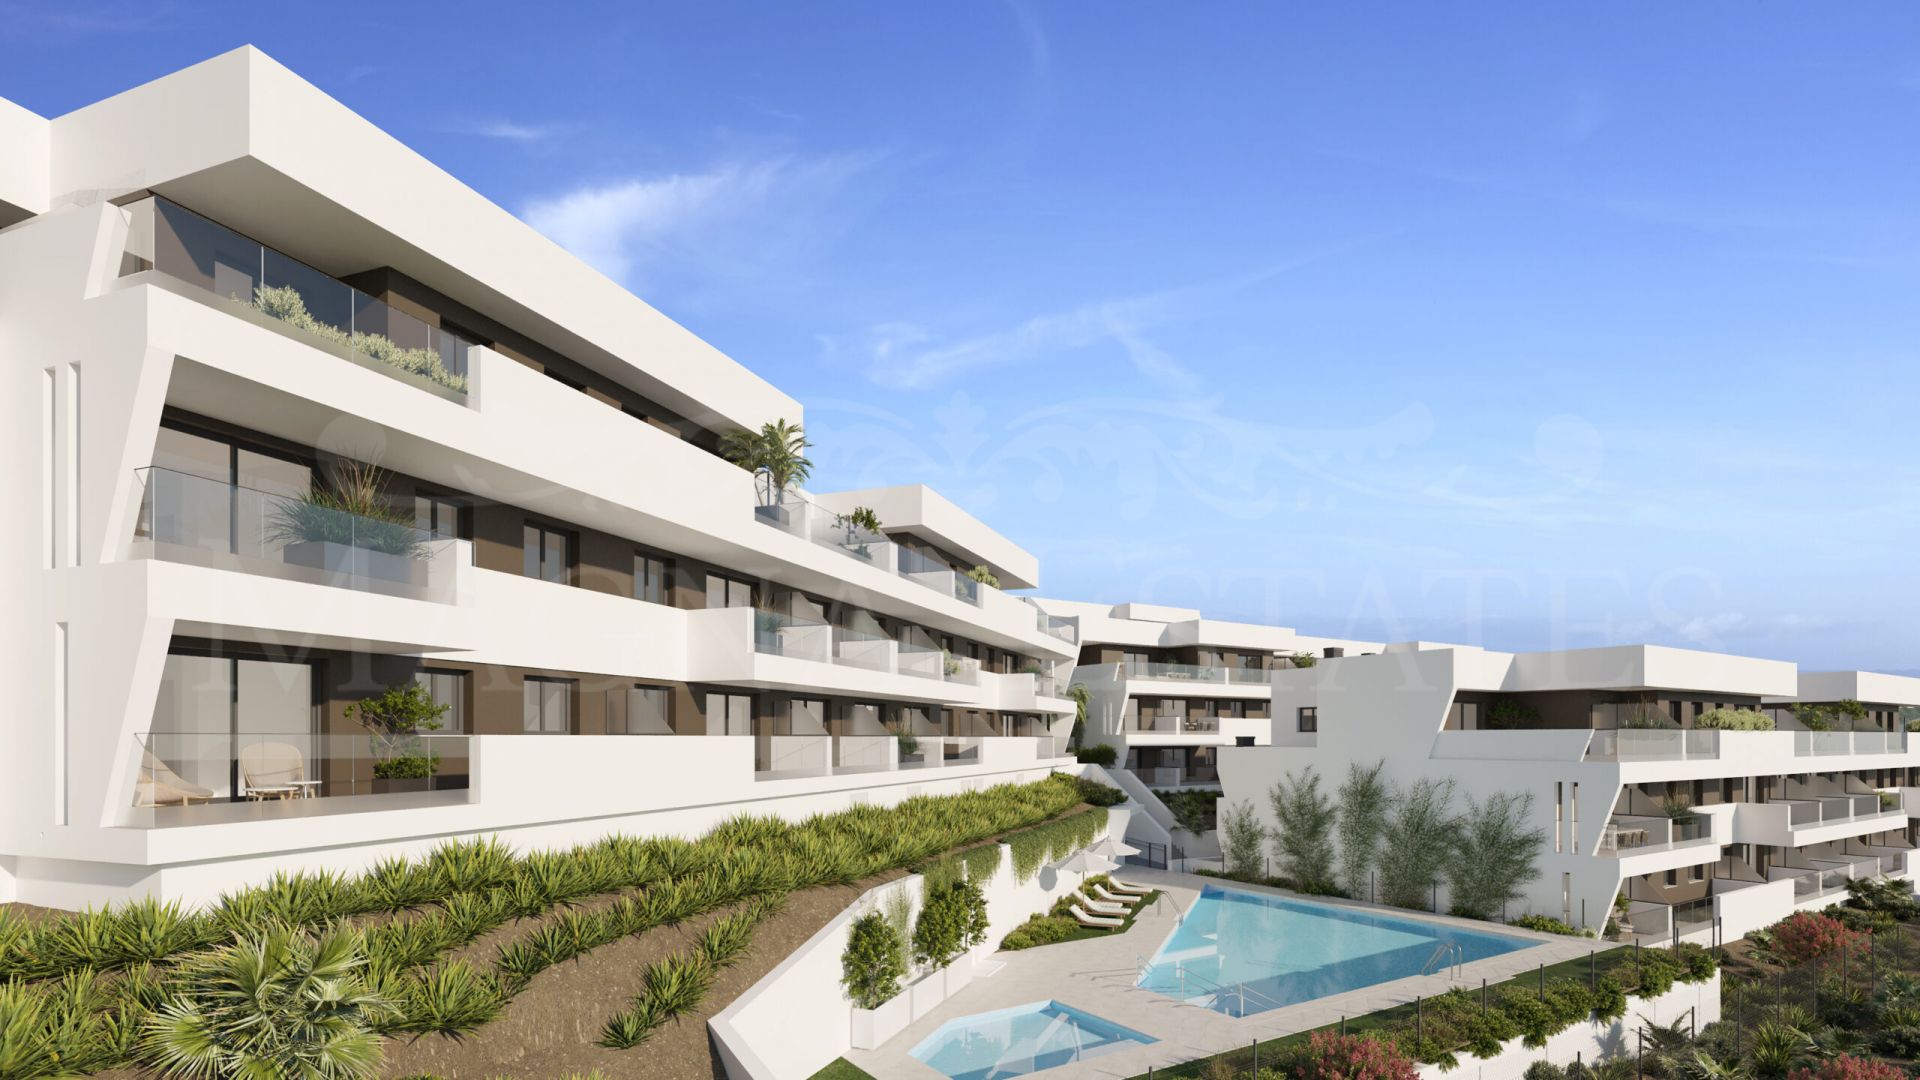 3 bedroom apartment in Estepona at an exceptional price.